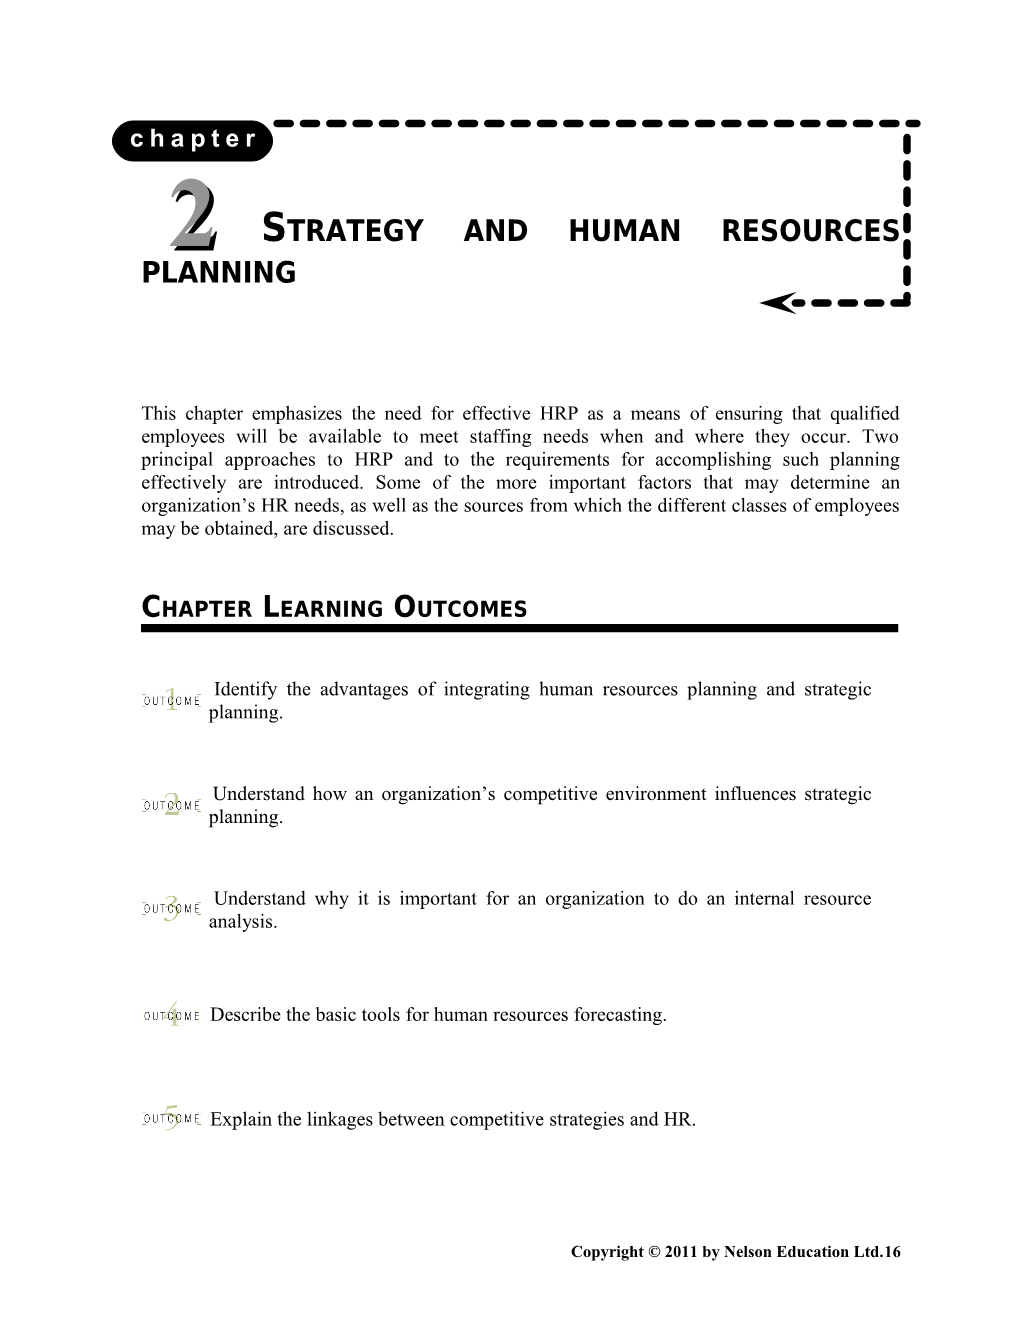 Chapter 4 Human Resources Planning and Recruitment